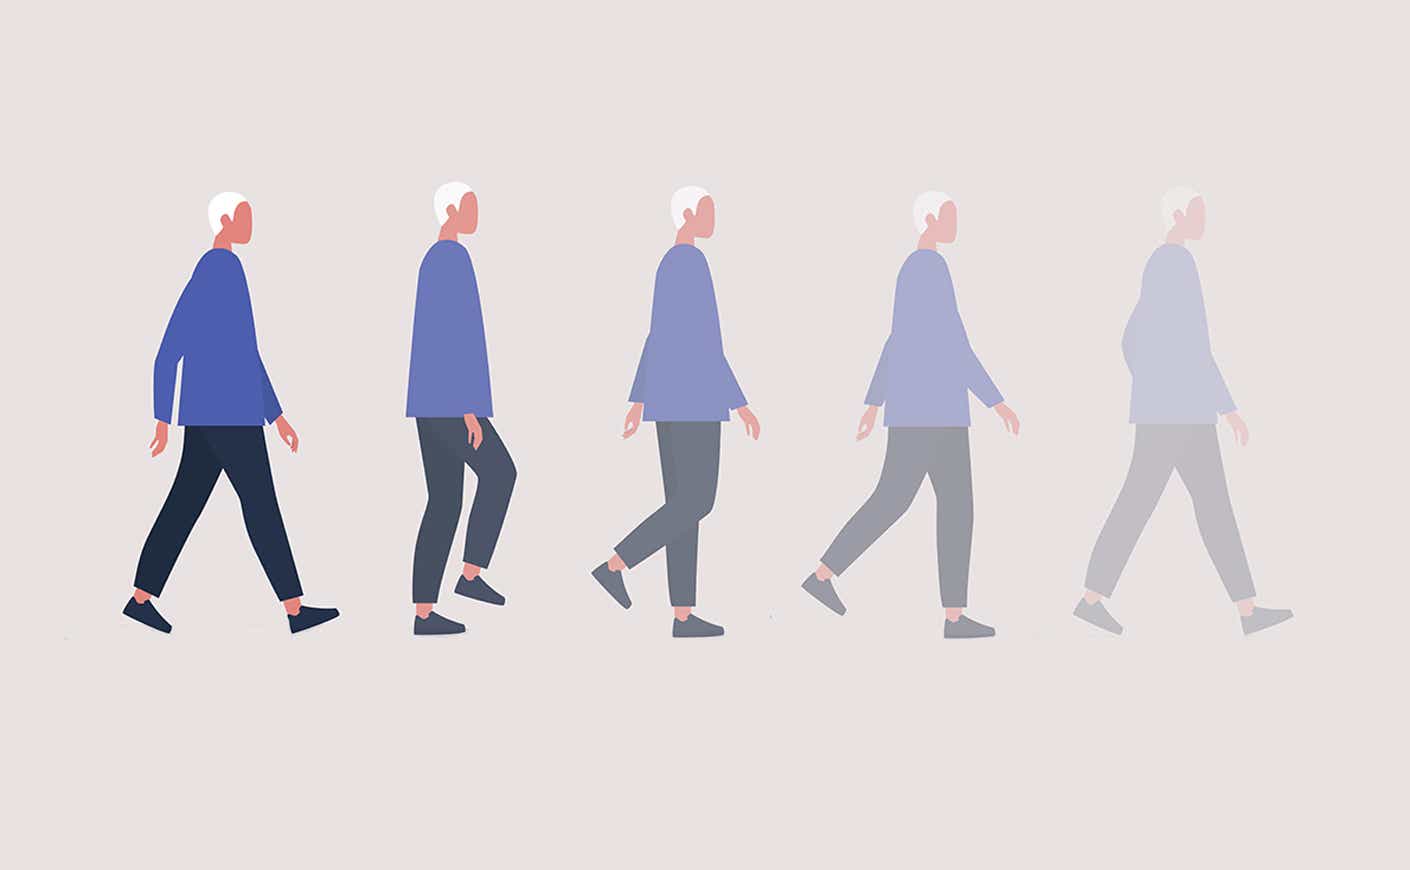 Illustration of elderly people walking whose forms are fading